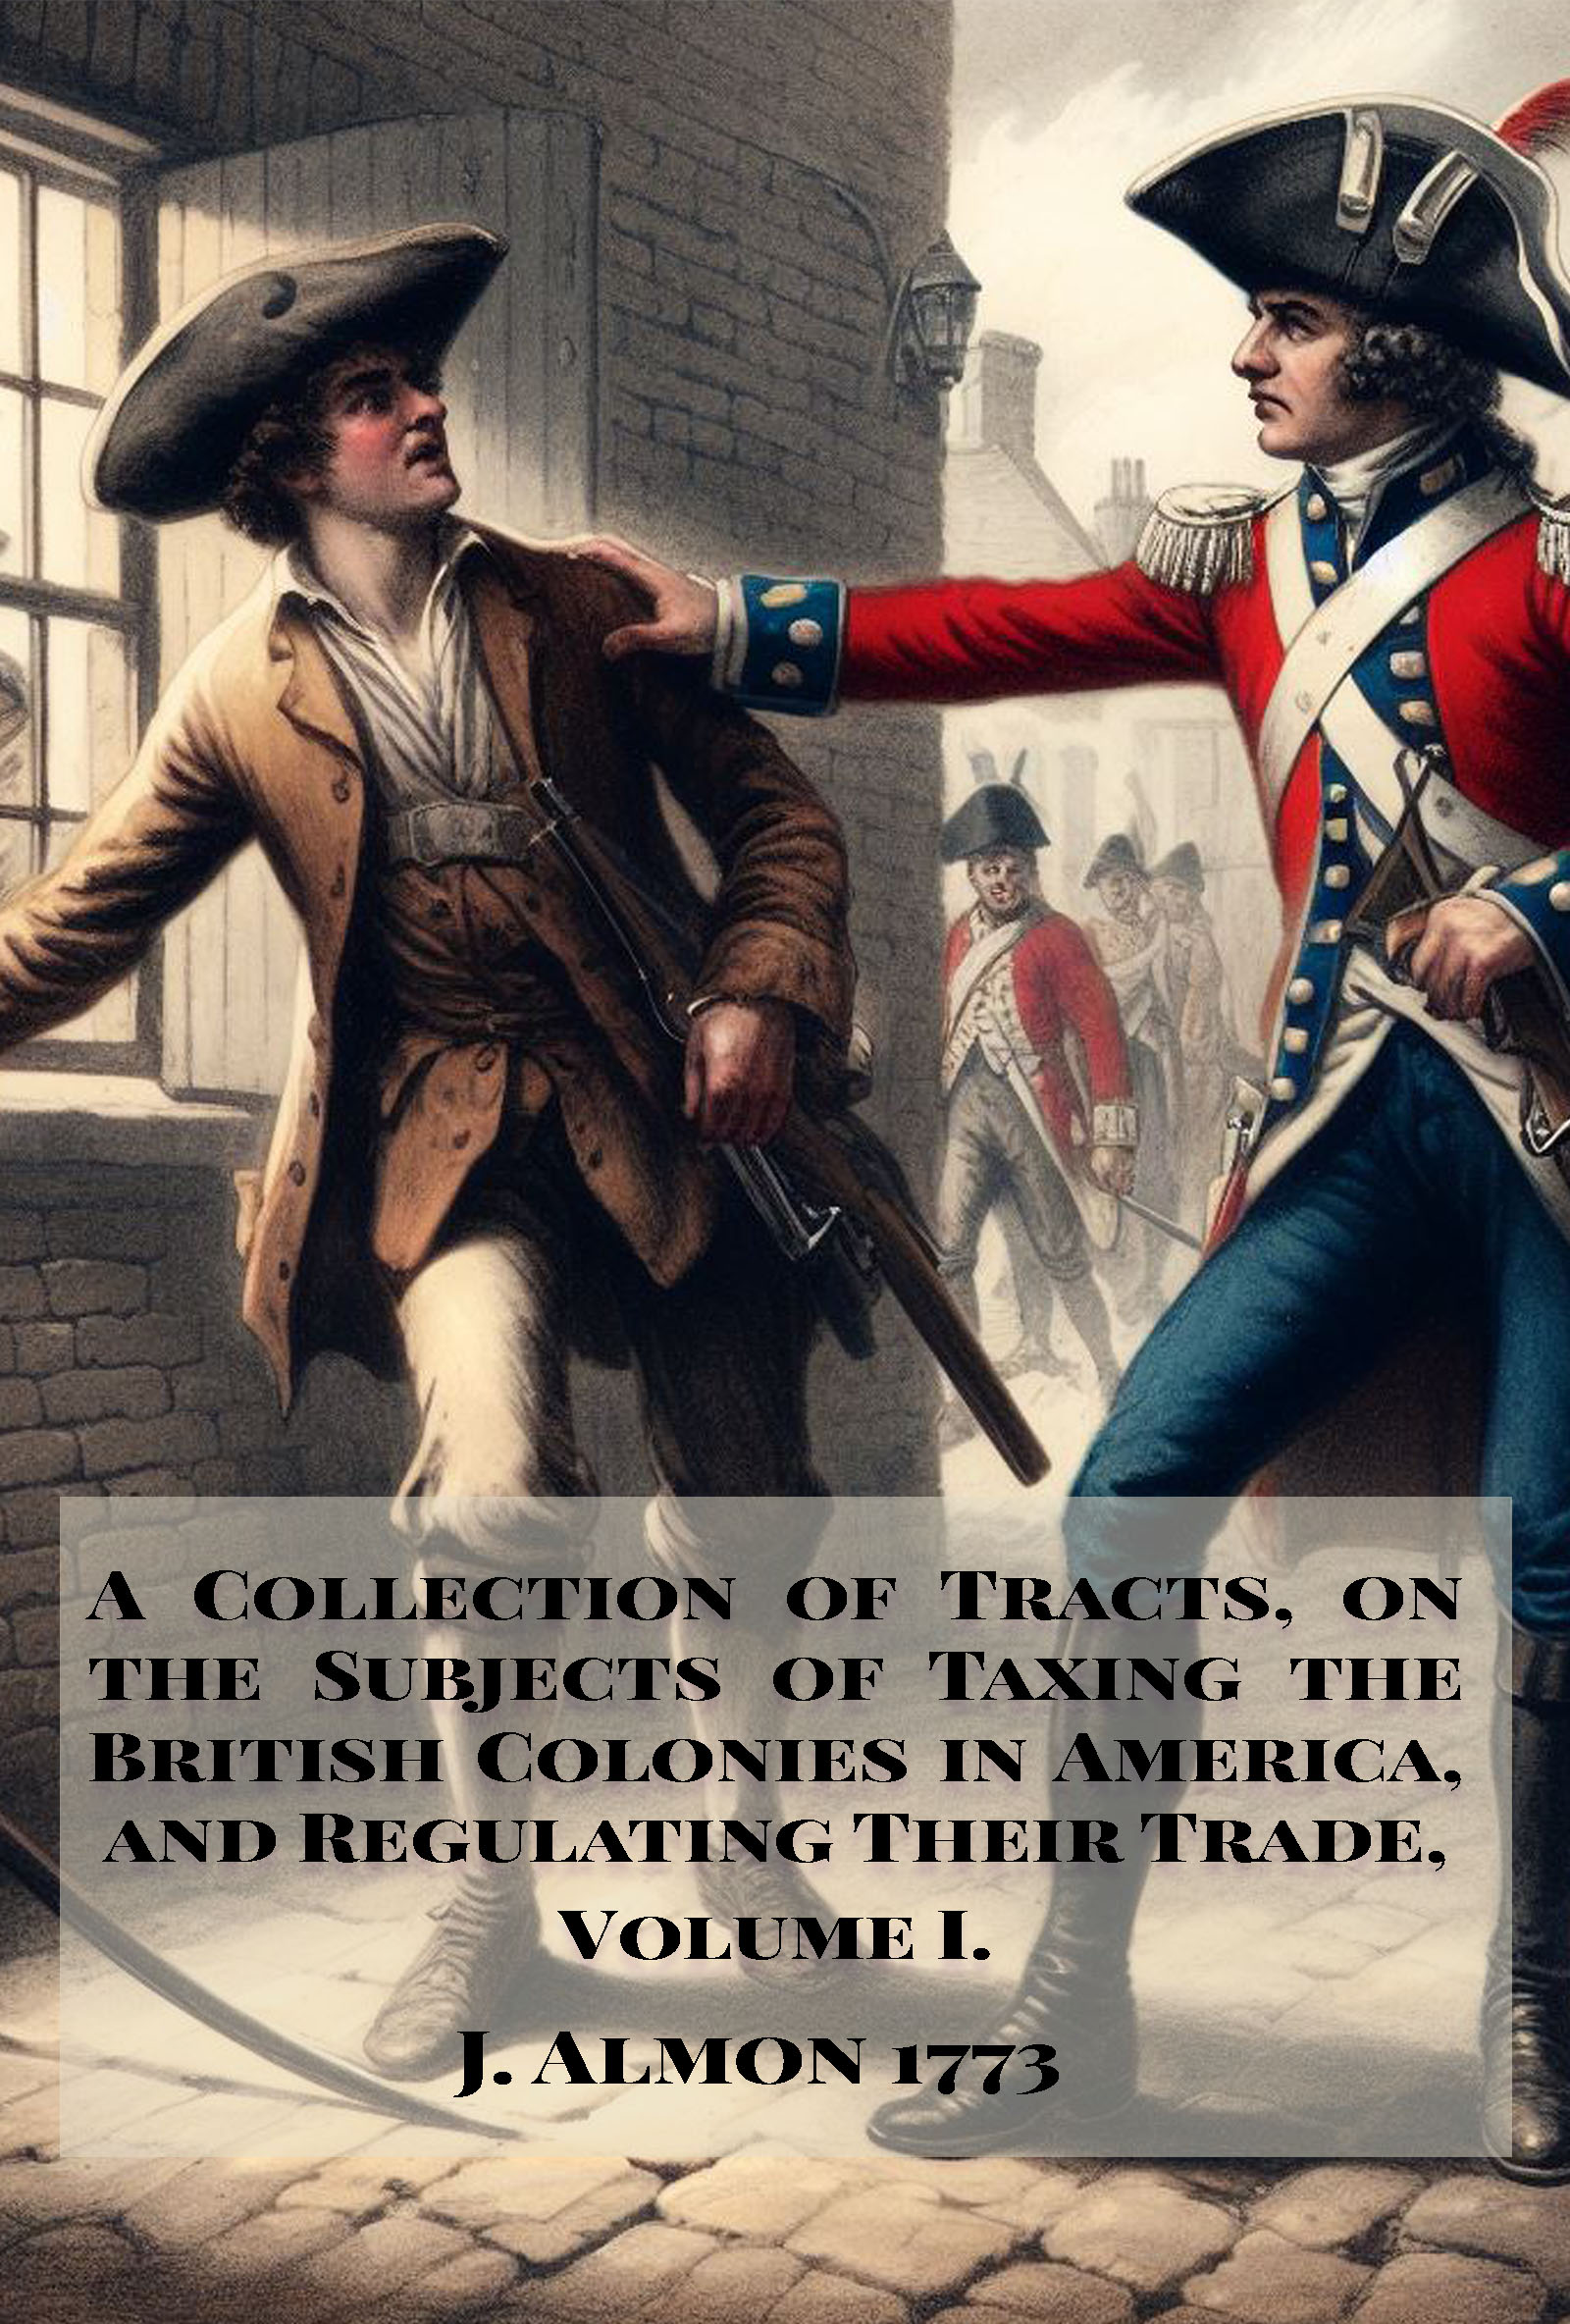 A Collection of Tracts, on the Subjects of Taxing the British Colonies in America, and Regulating Their Trade.: Volume I